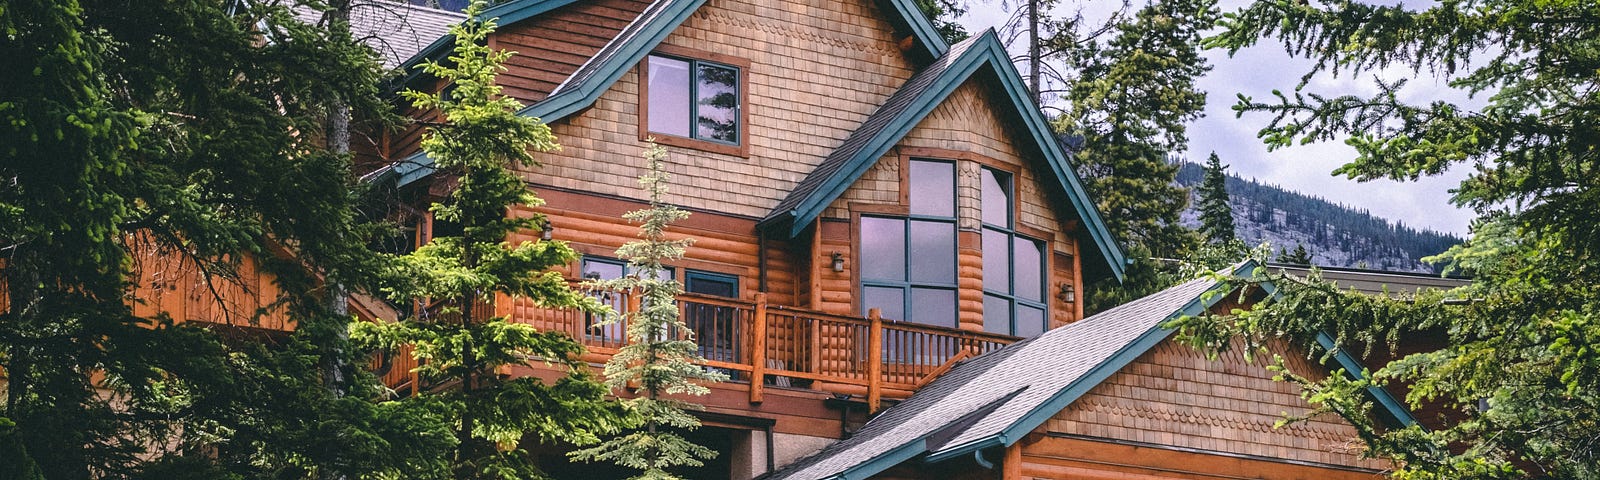 A large cabin nestled among trees. A beautiful-looking vacation home.